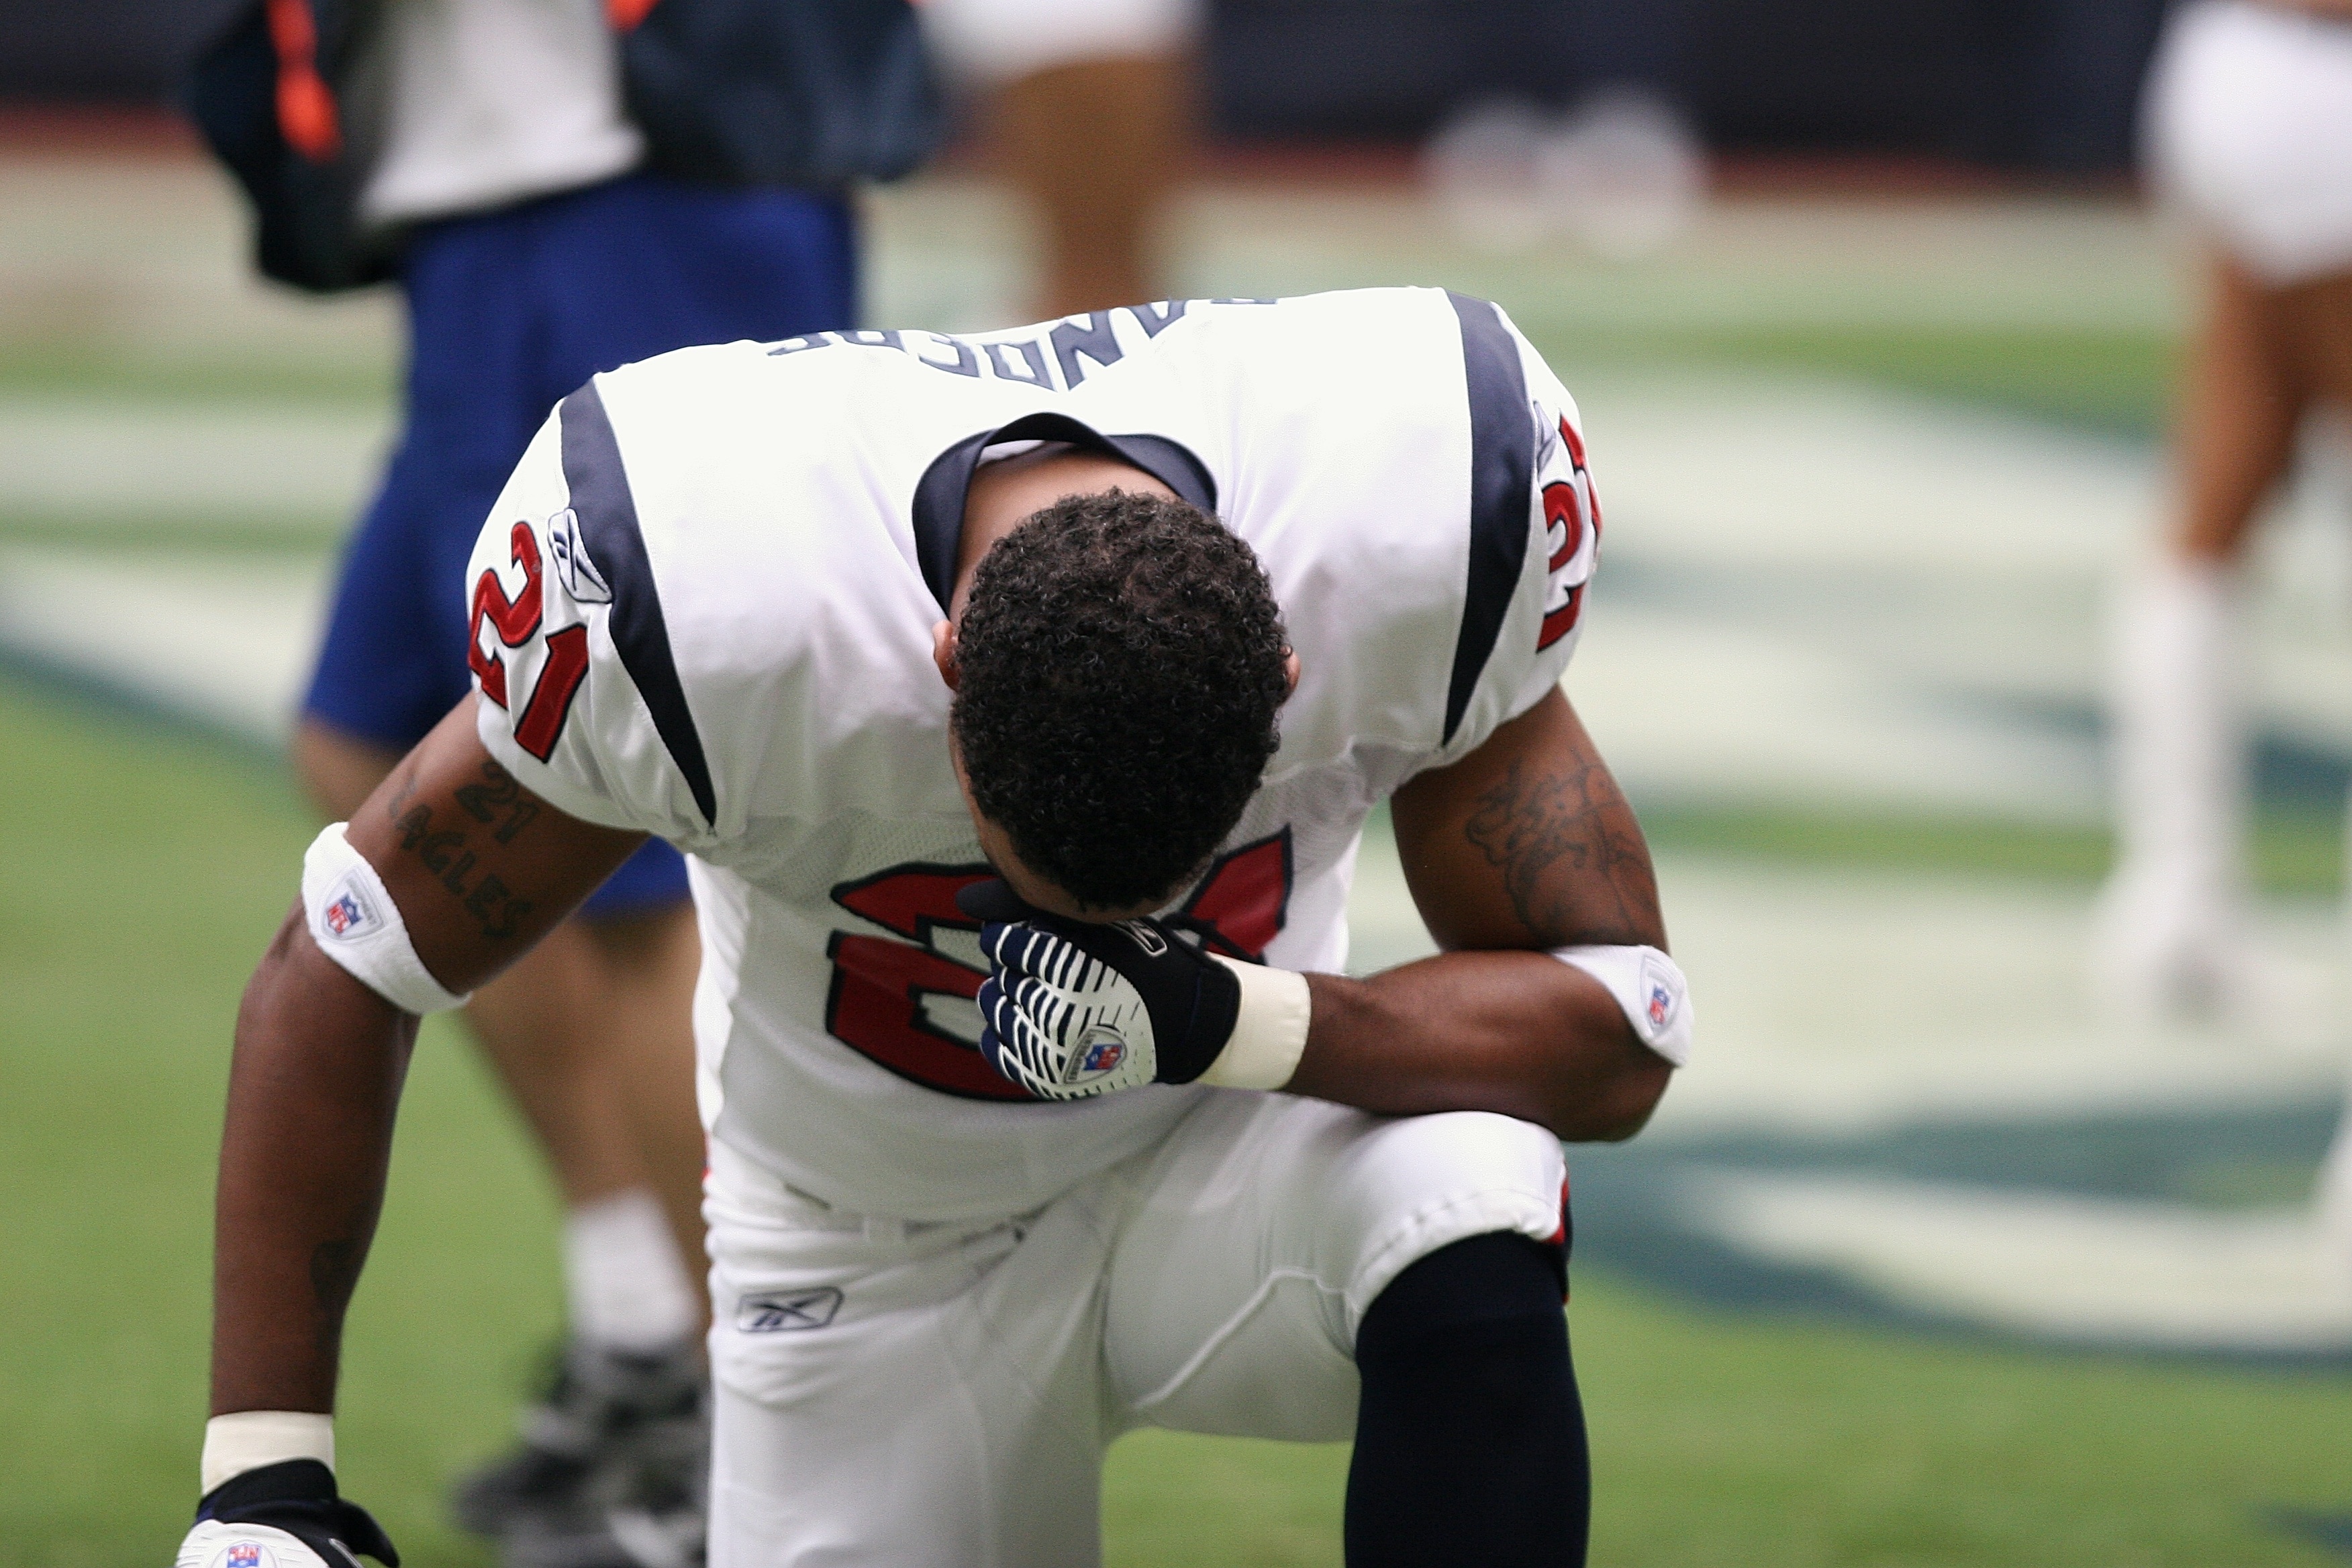 american football player in white and red jersey kneeling